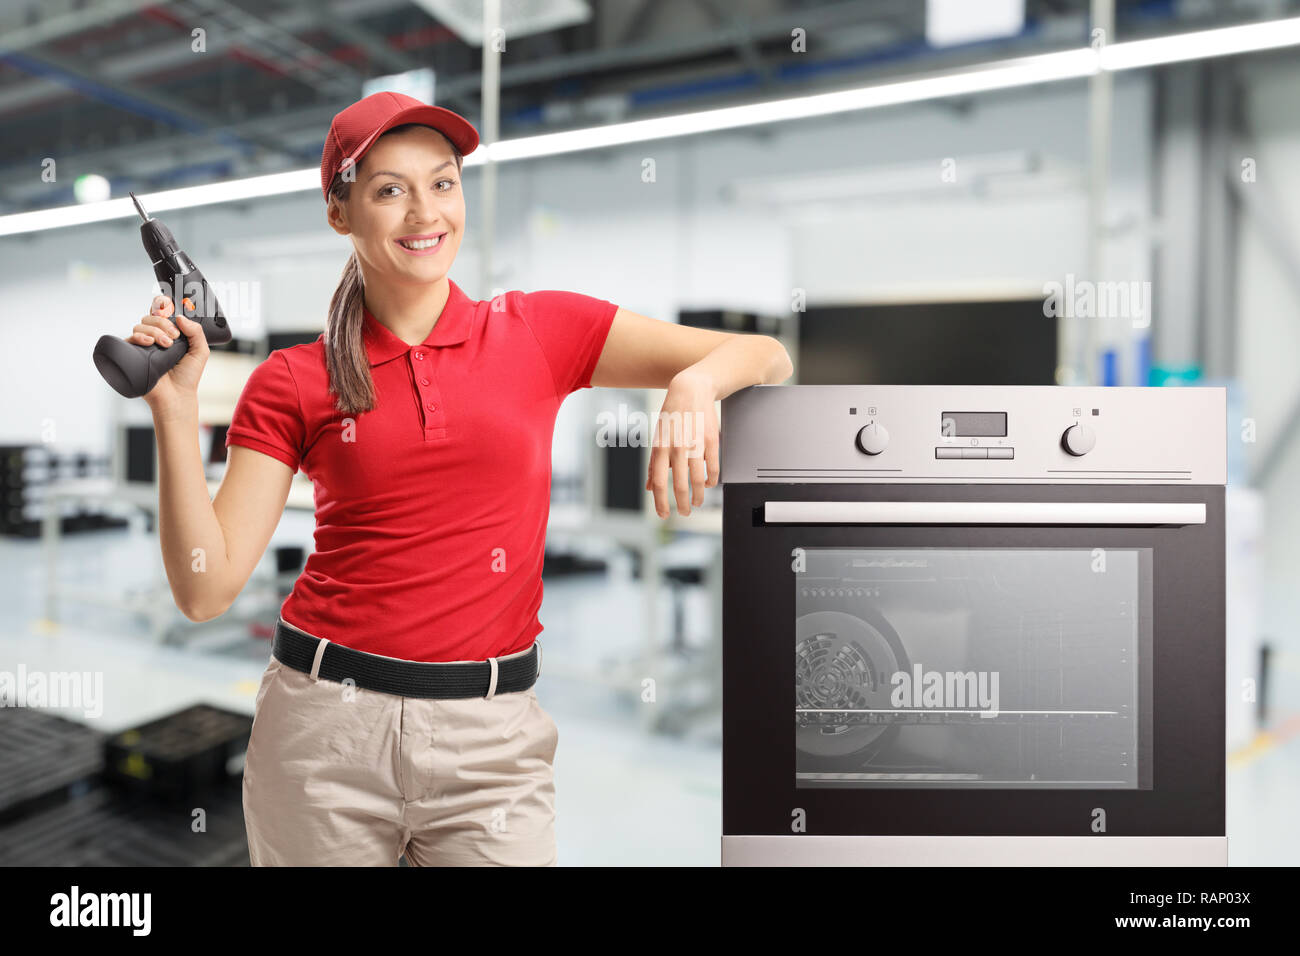 Repairwoman in a red t-shirt and a red cap with a drill and an oven in a factory Stock Photo